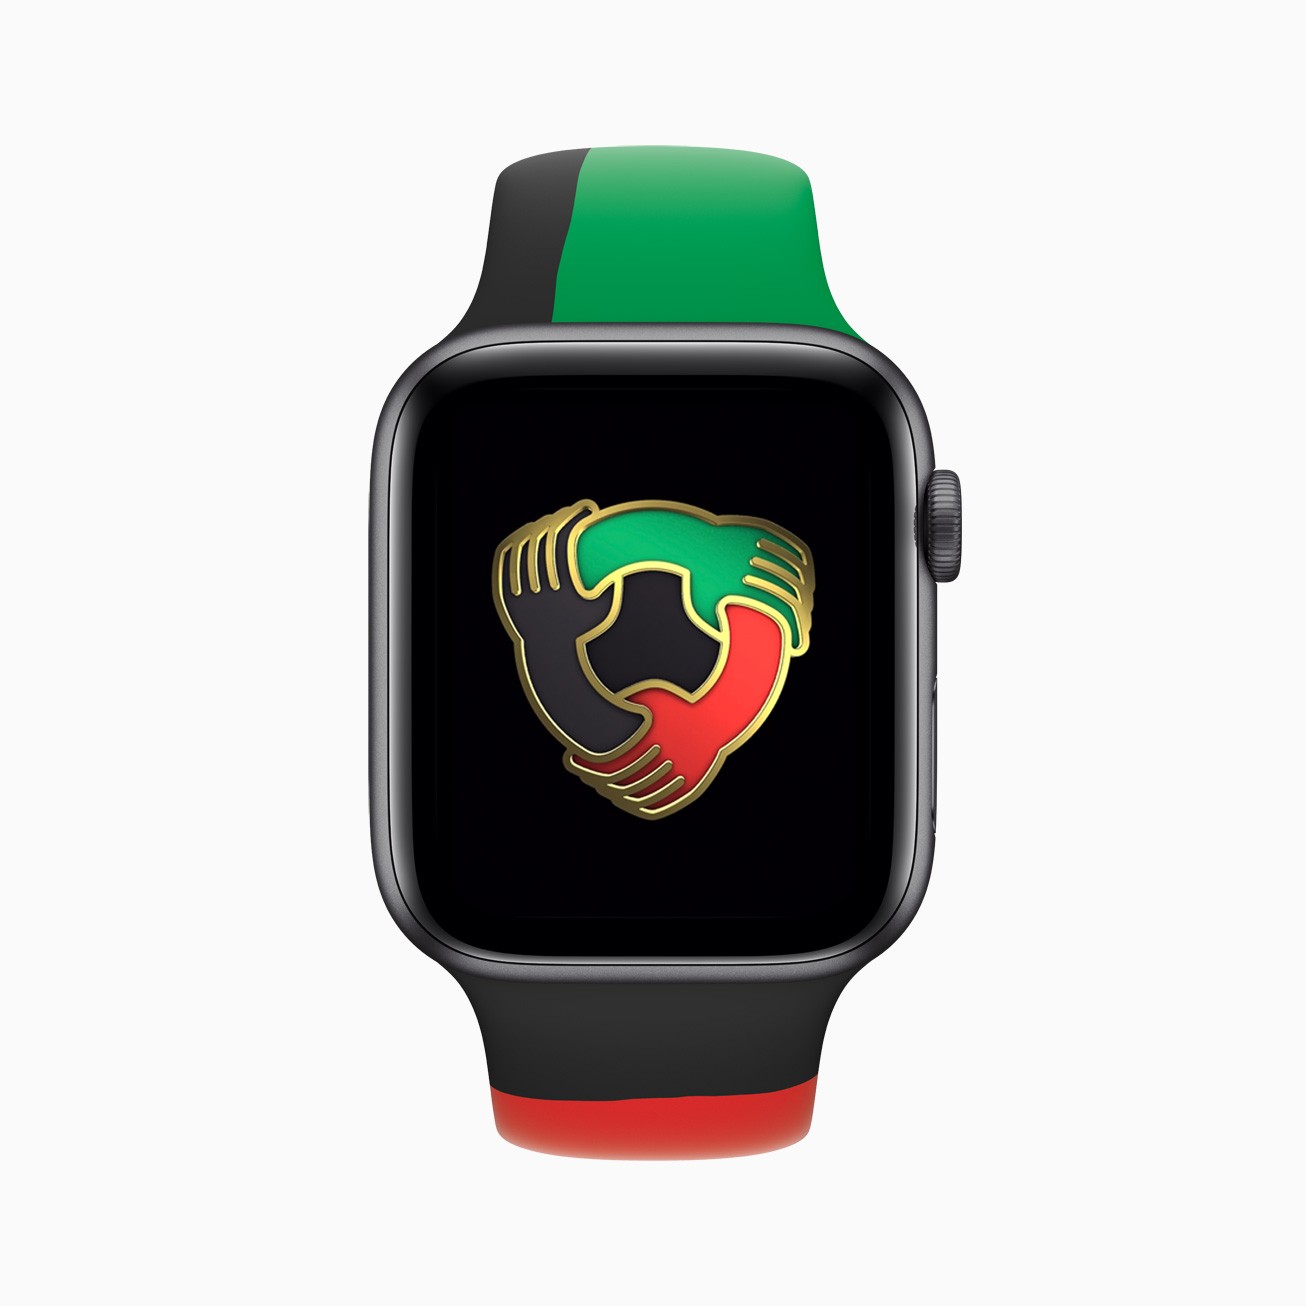 Apple Launches LimitedEdition Apple Watch Series 6 Black Unity